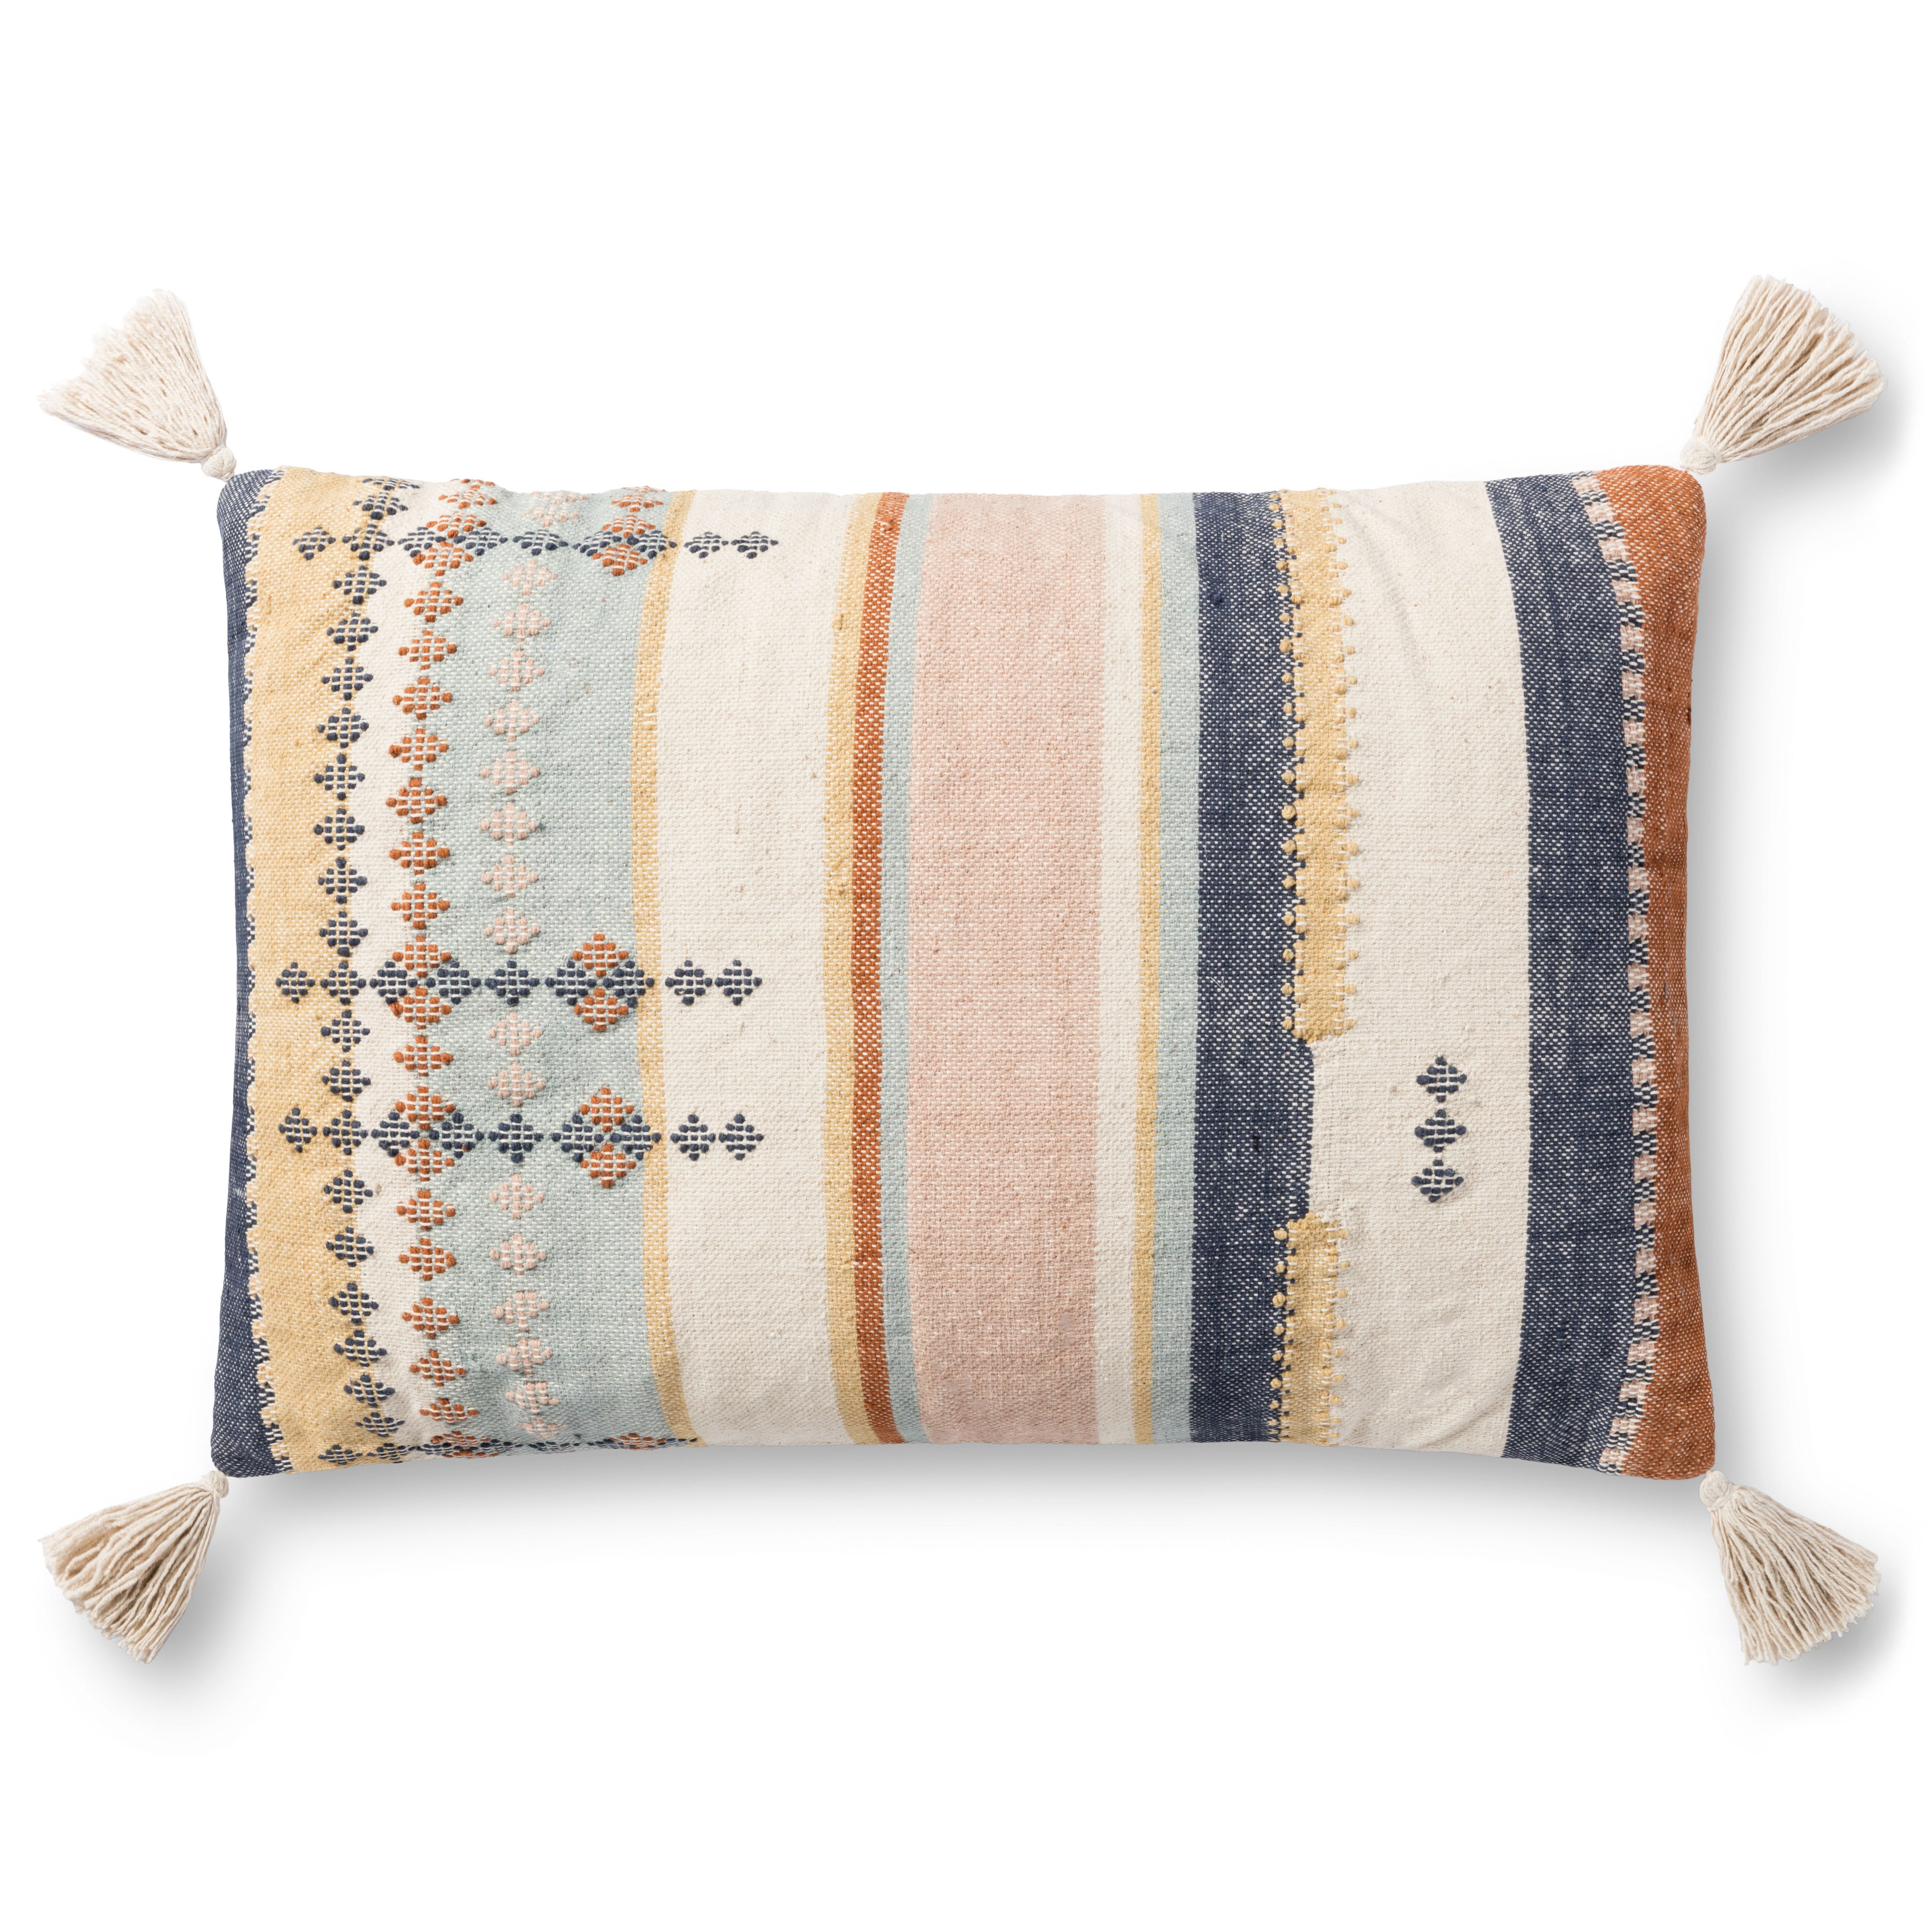 Desert Lumbar Throw Pillow Cover, Multicolor, 26" x 16" - Magnolia Home by Joana Gaines Crafted by Loloi Rugs